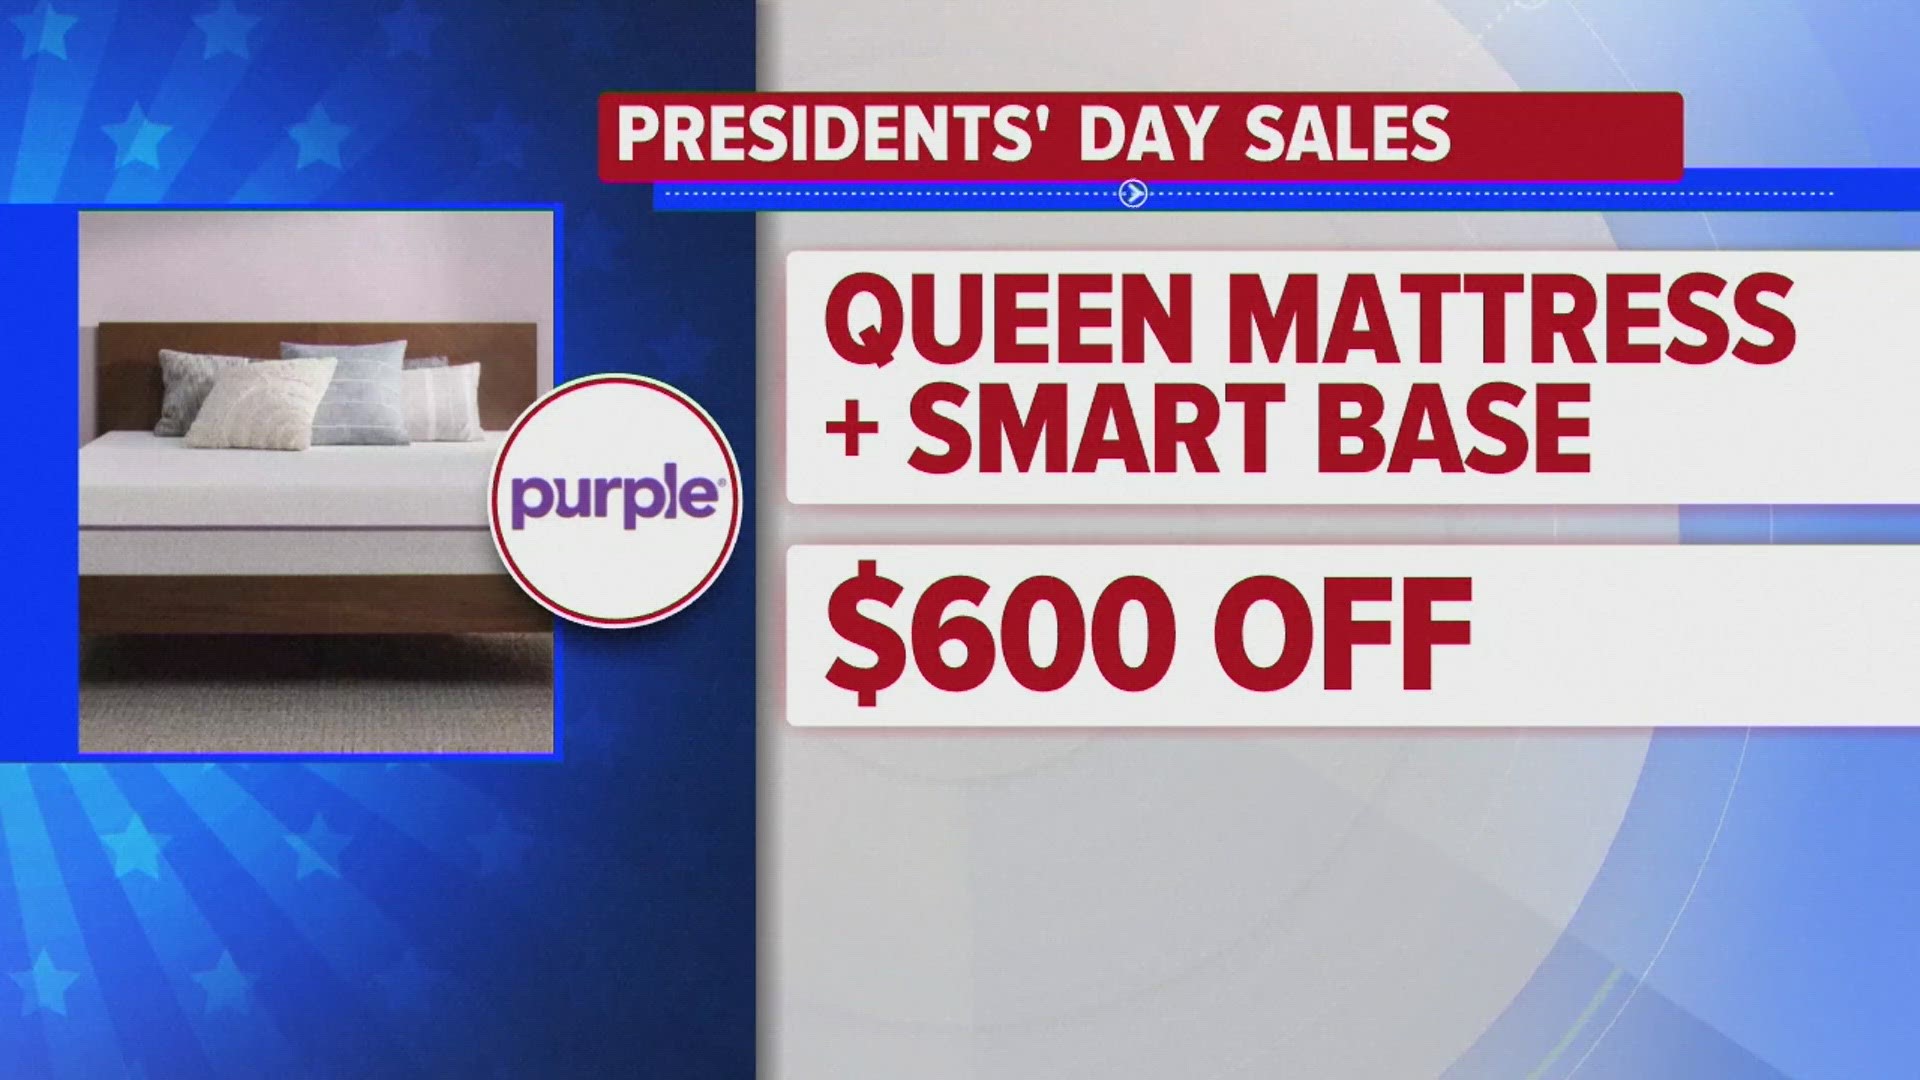 Stores in North Texas have a list of Presidents' Day deals online.